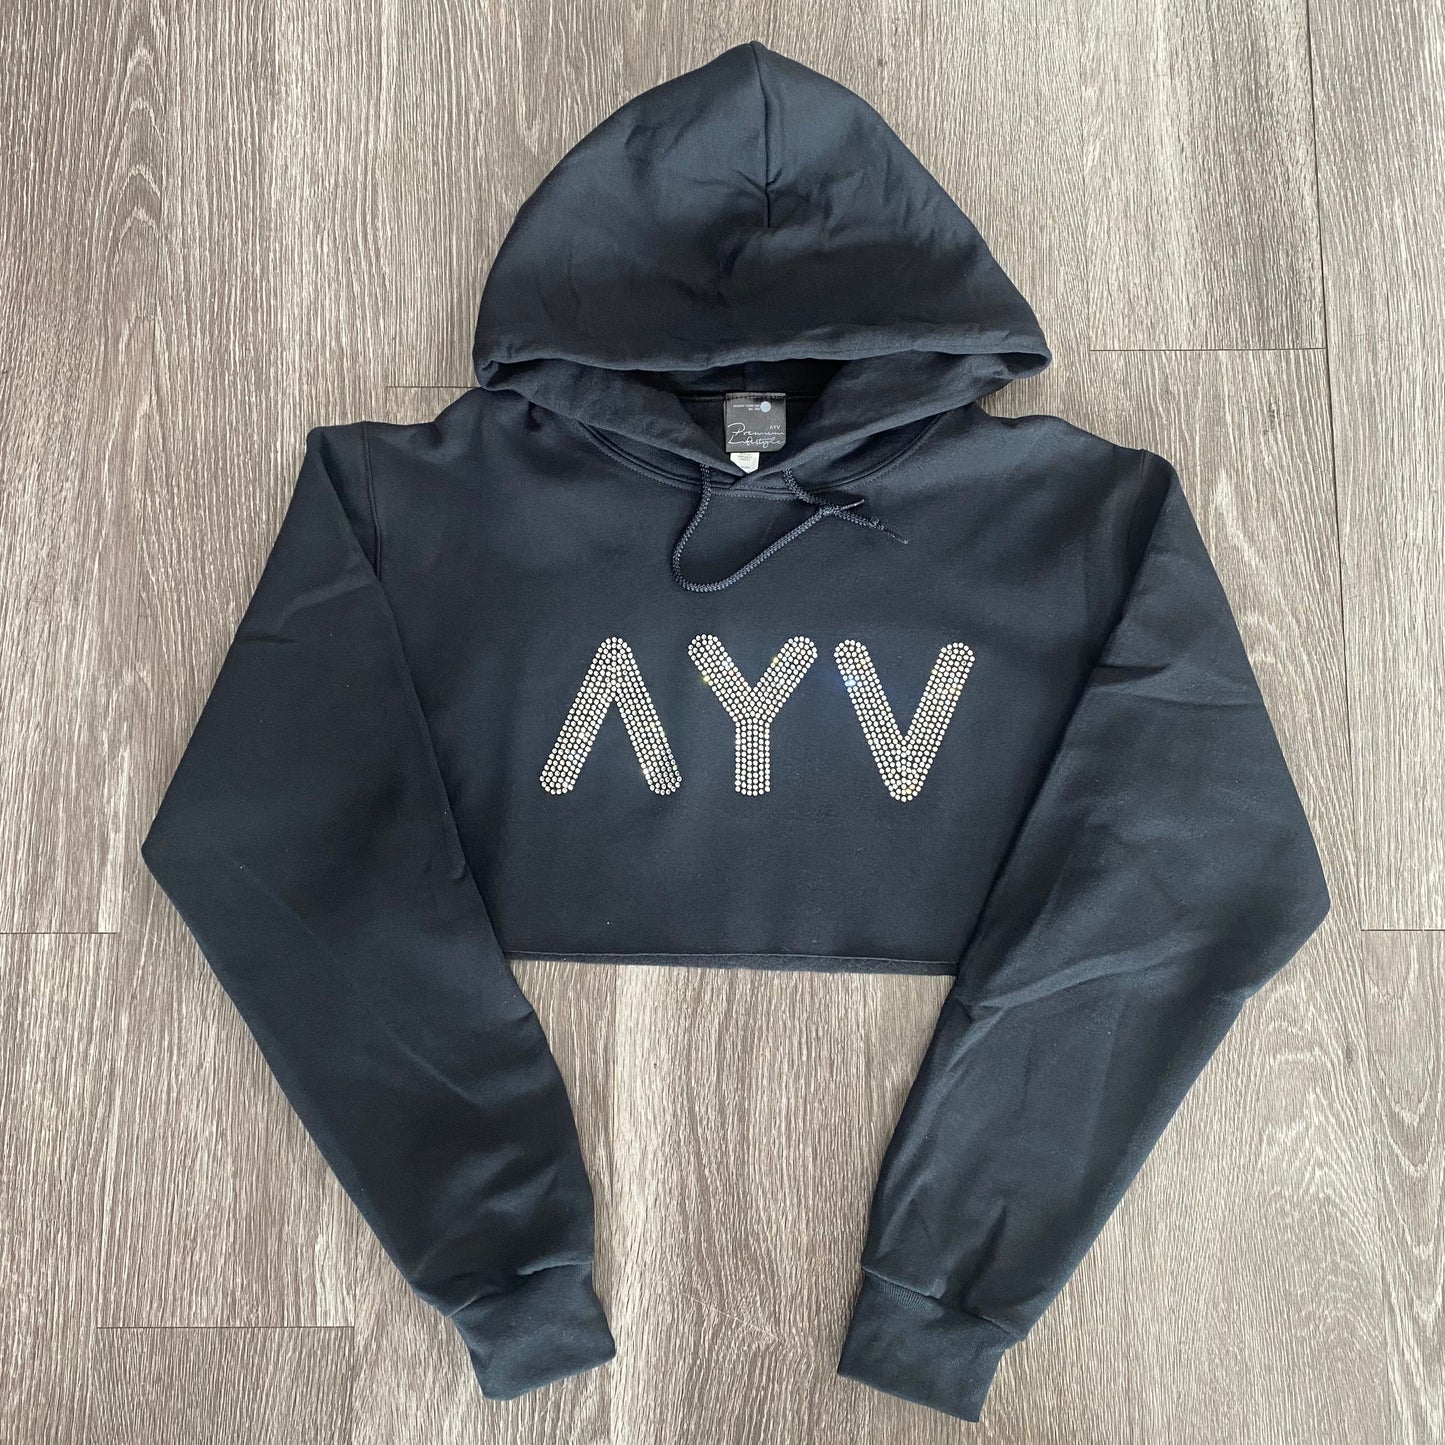 “Hollywood” Cropped Hoody